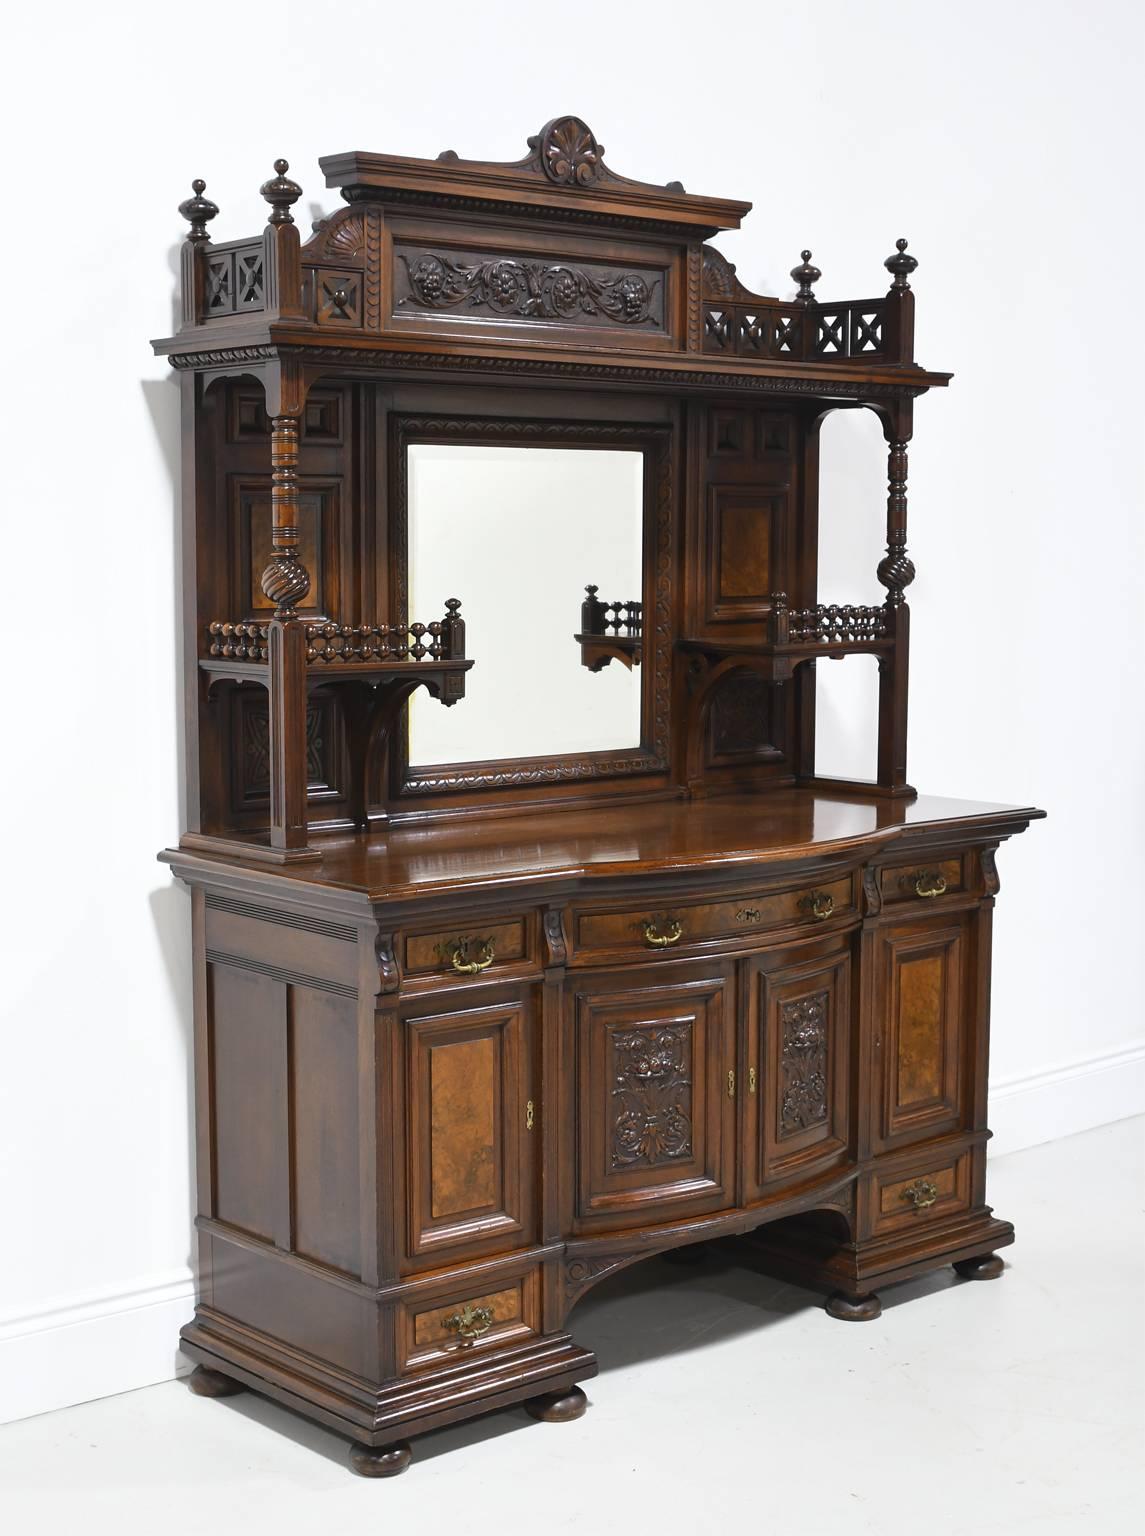 From the American Golden Age, a very fine Belle Époque Sideboard or Buffet Cabinet in exquisite West Indies mahogany. New York City, circa 1880. Base features bowed center cabinet doors with finely carved panels, flanked by a cabinet door on each